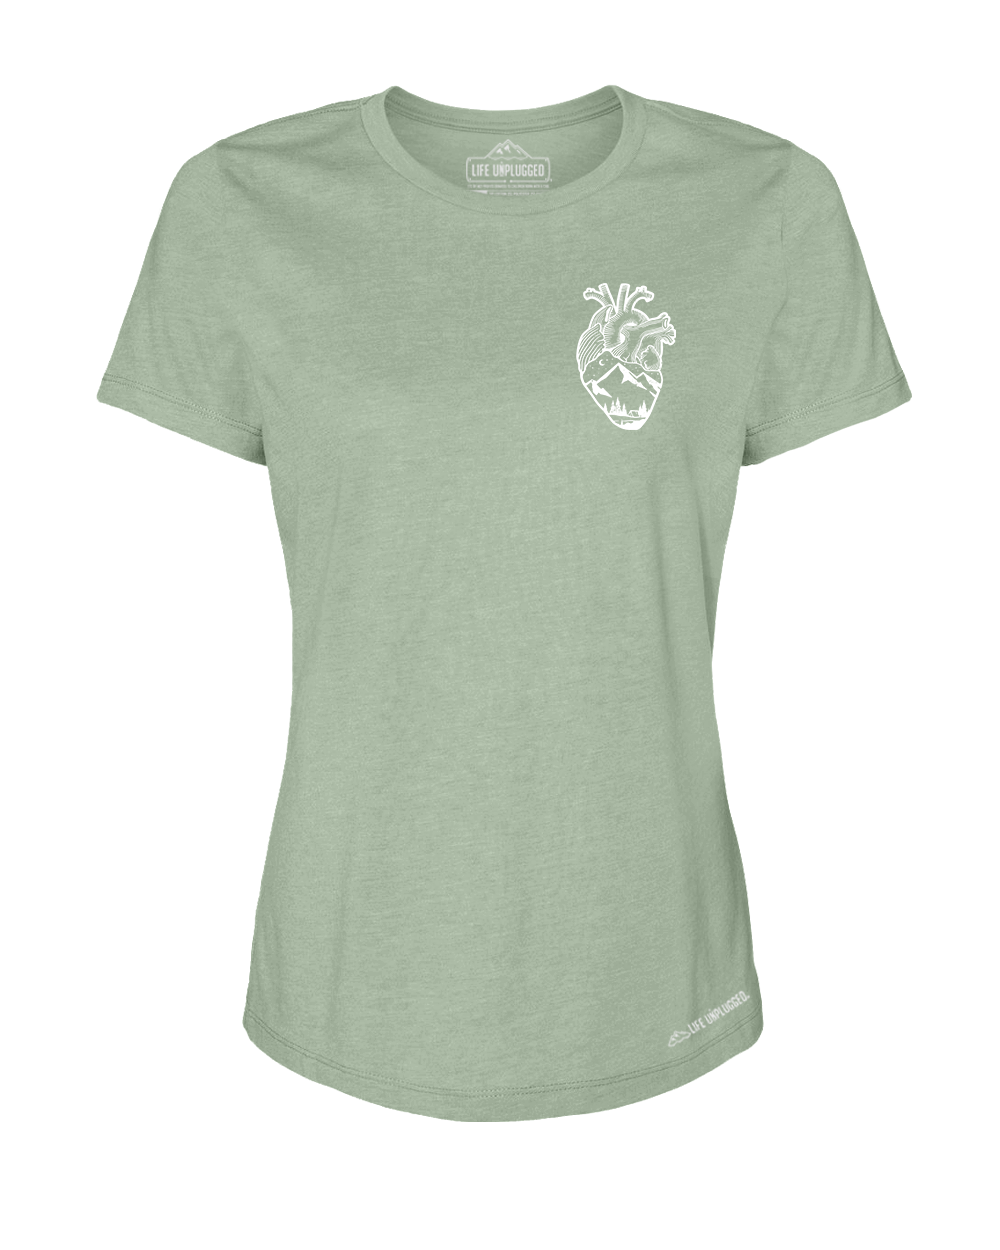 Anatomical Heart (Left Chest) Premium Women's Relaxed Fit Polyblend T-Shirt - Life Unplugged